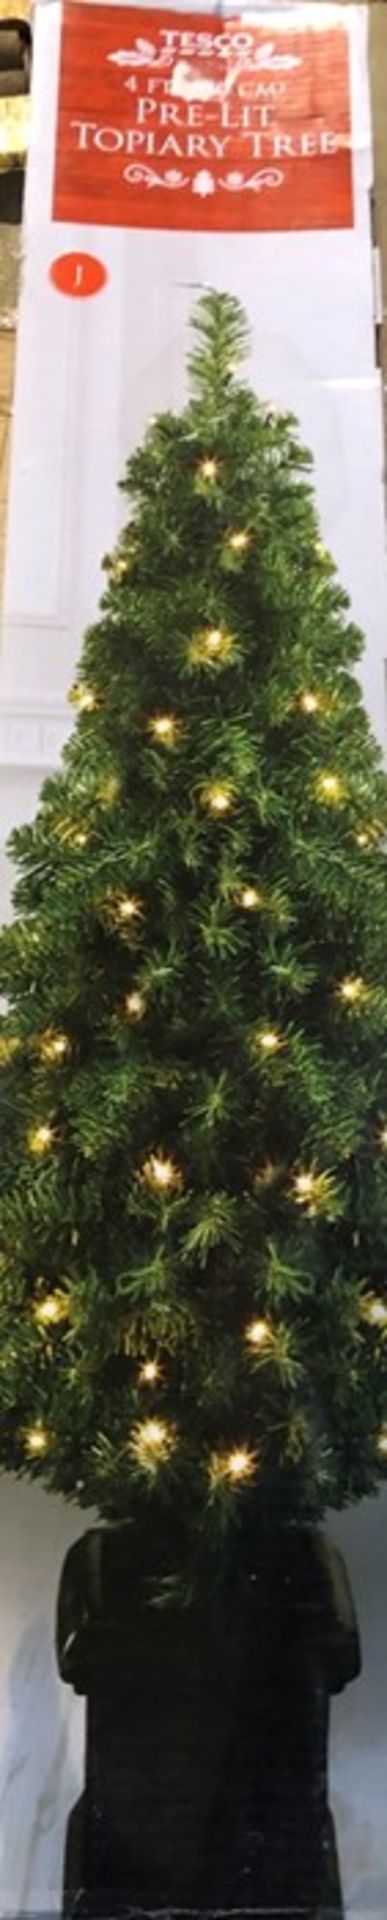 1 BOXED 4FT LIT TOPIARY XMAS TREE / RRP £59.95 (PUBLIC VIEWING AVAILABLE)